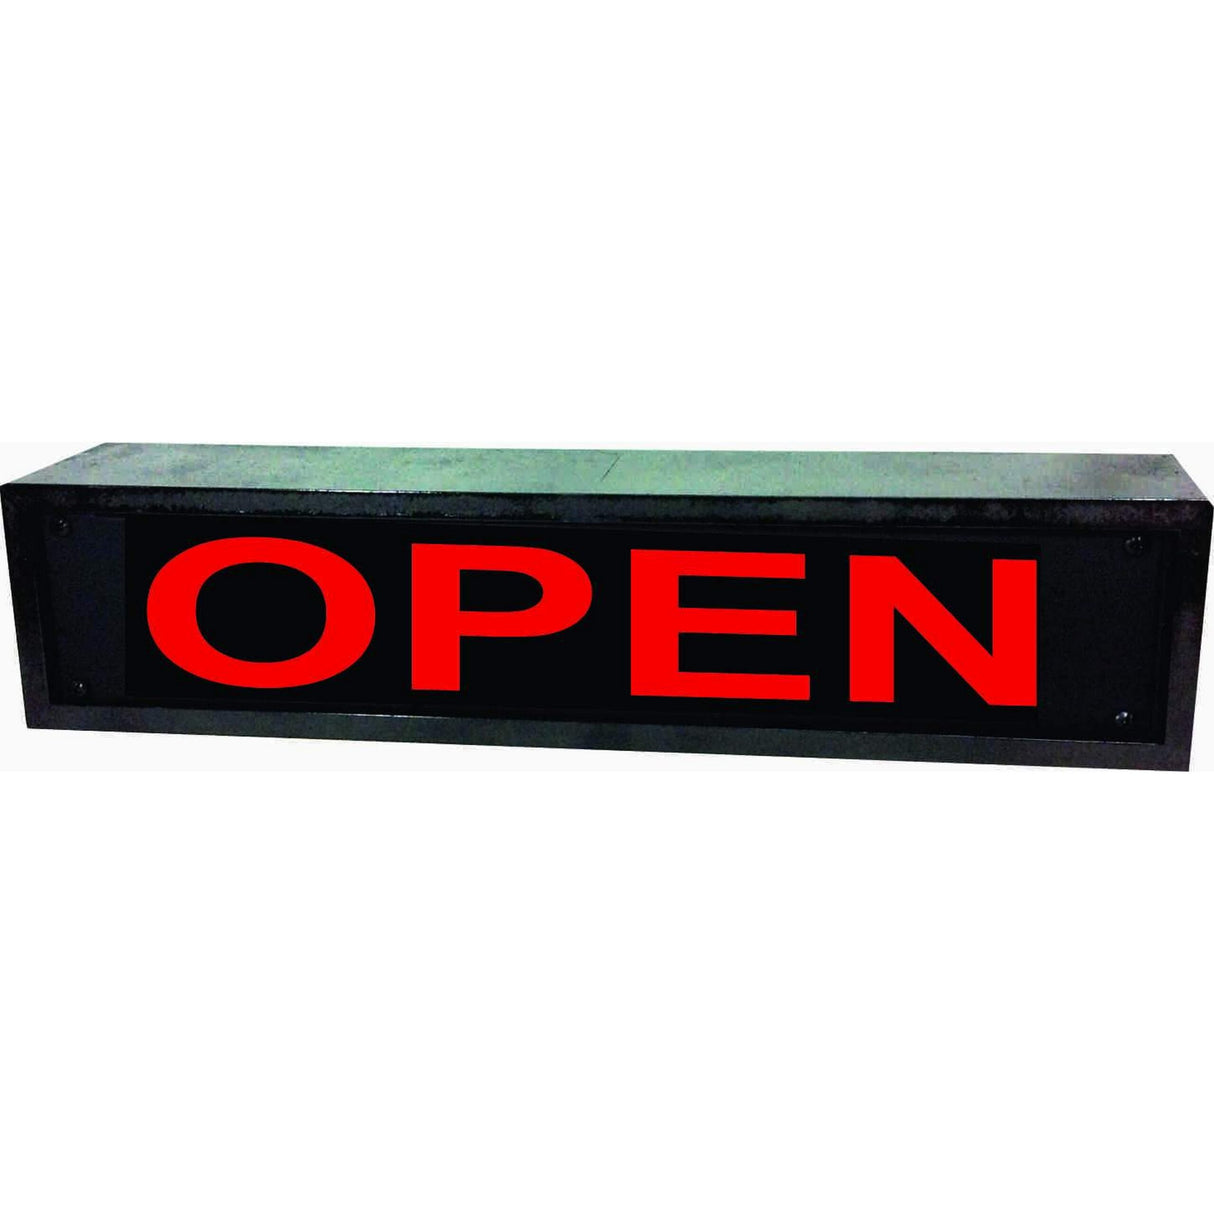 American Recorder OAS-4057-RD "OPEN" 2U Rackmount LED Lighted Sign with Enclosure, Red